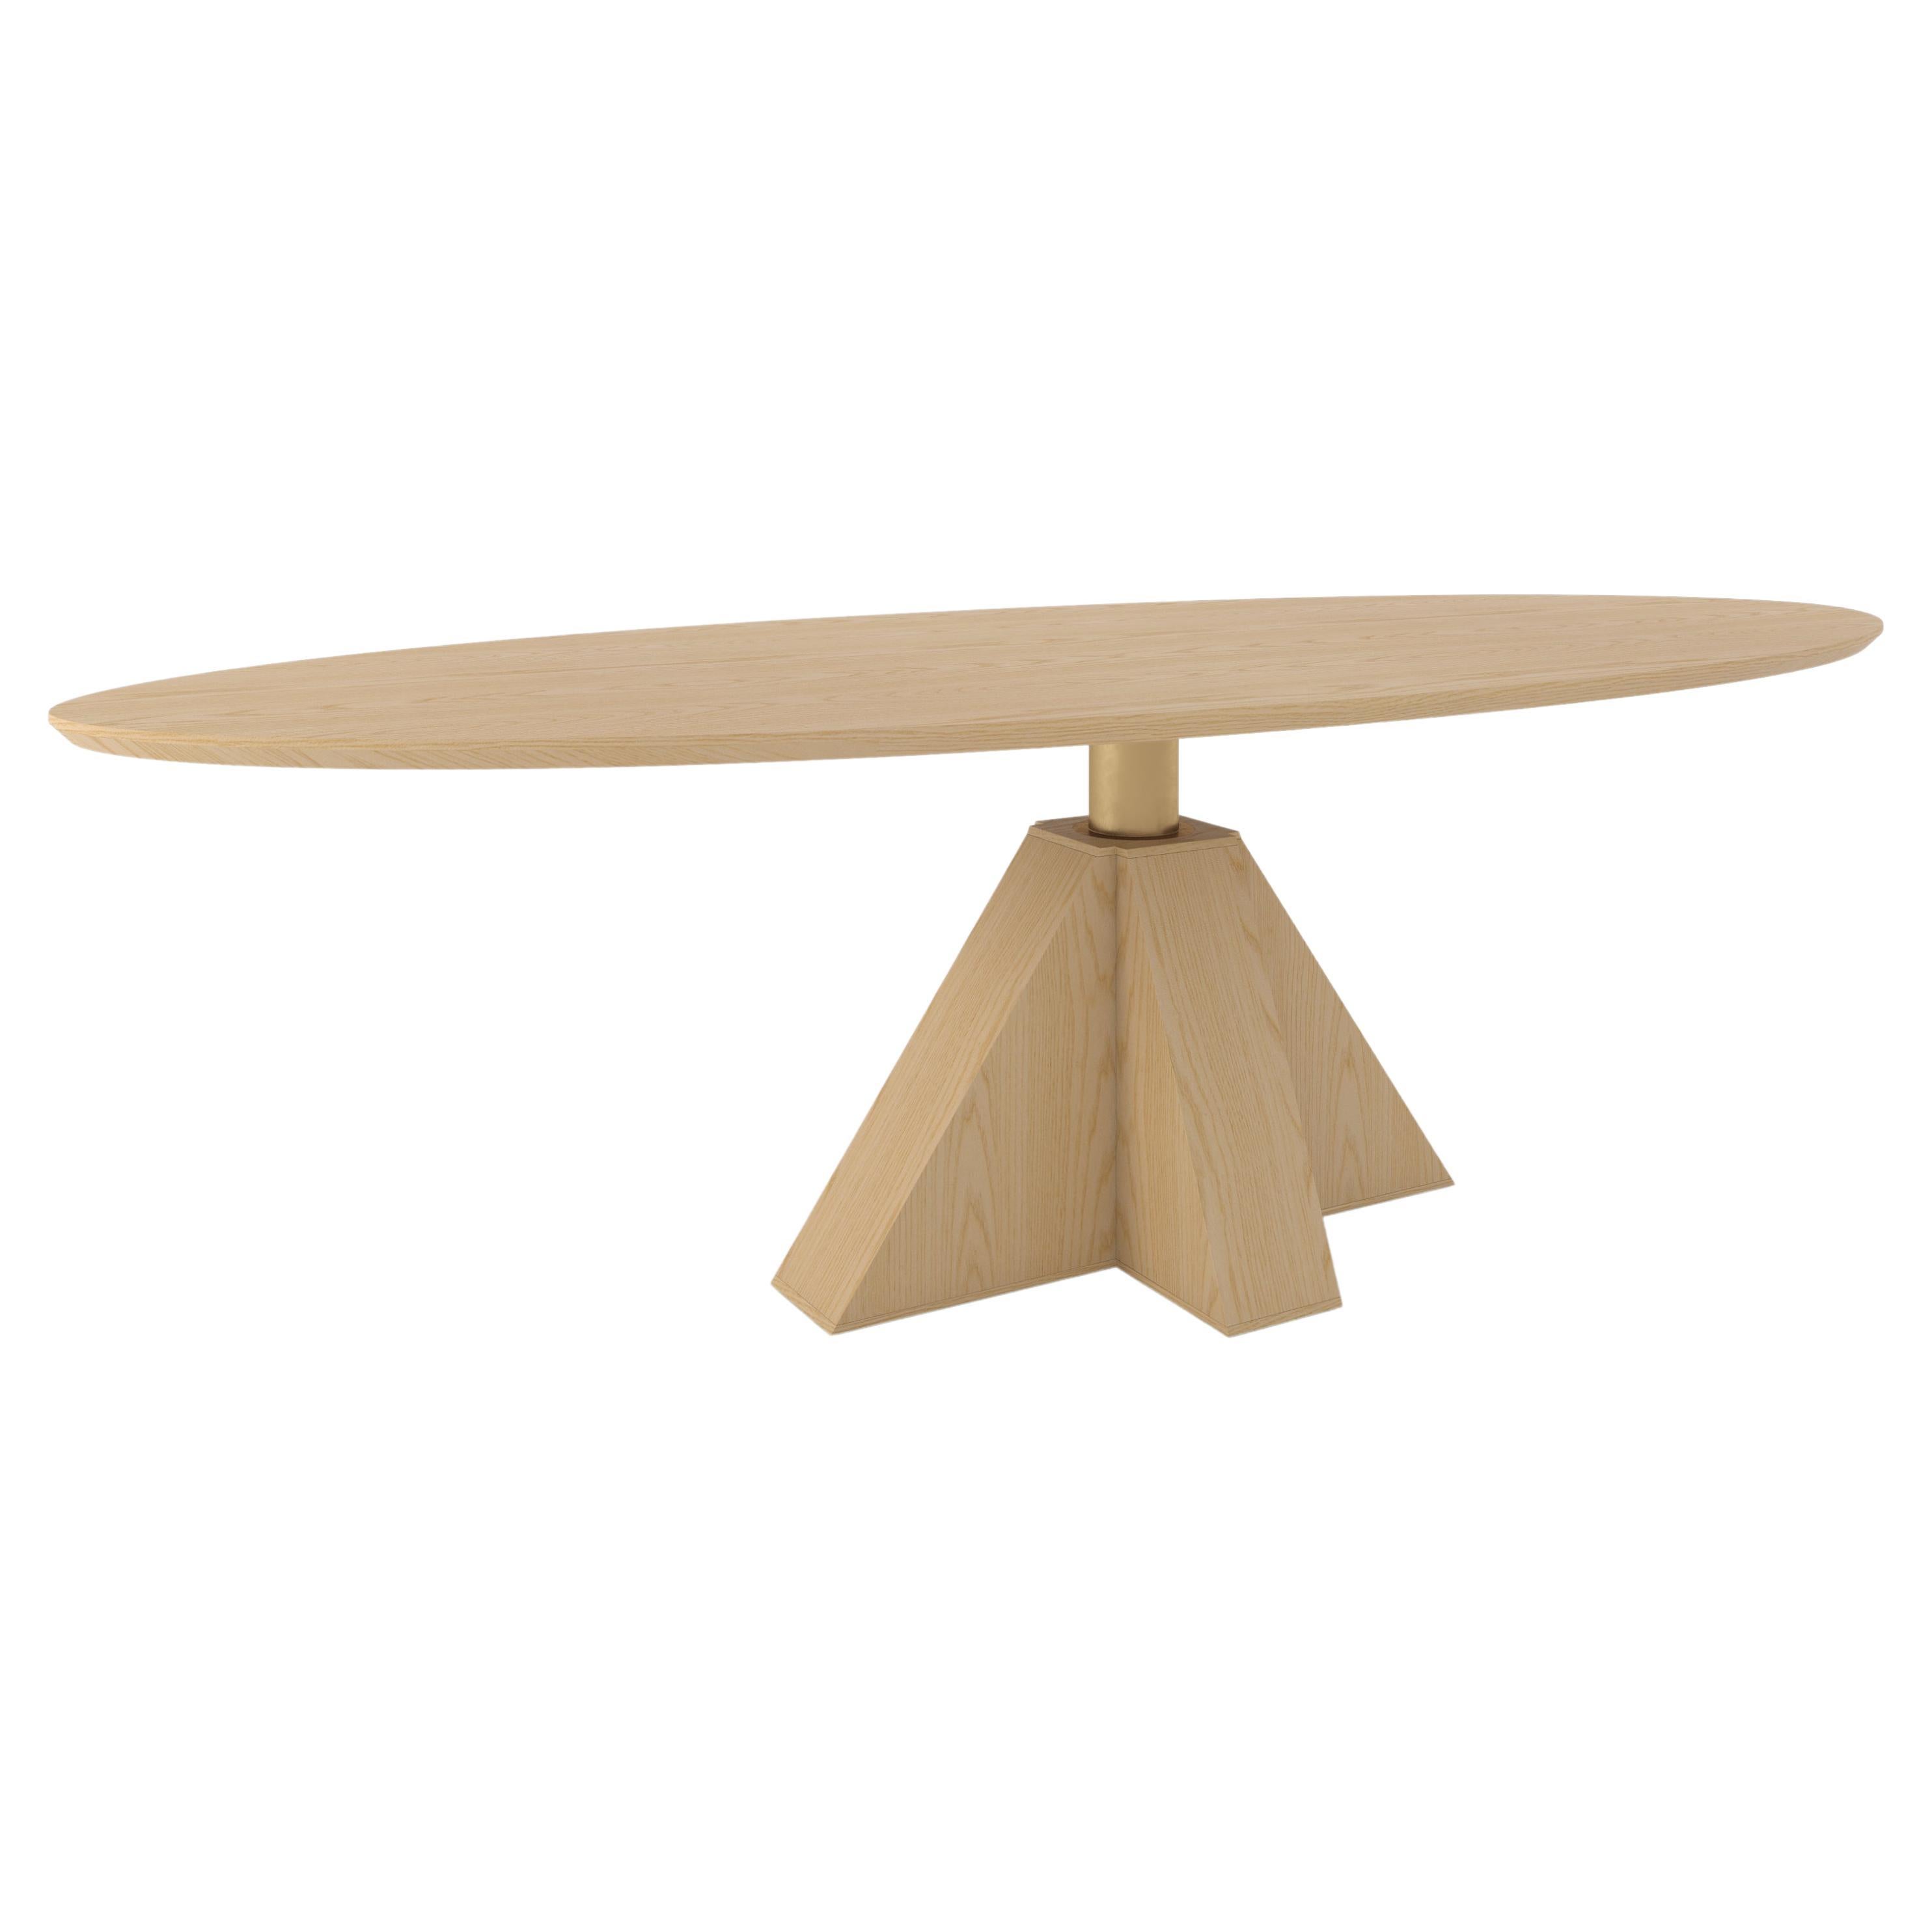 M-Oval Table by Daniel Boddam, 60" x 36", Natural Oak For Sale